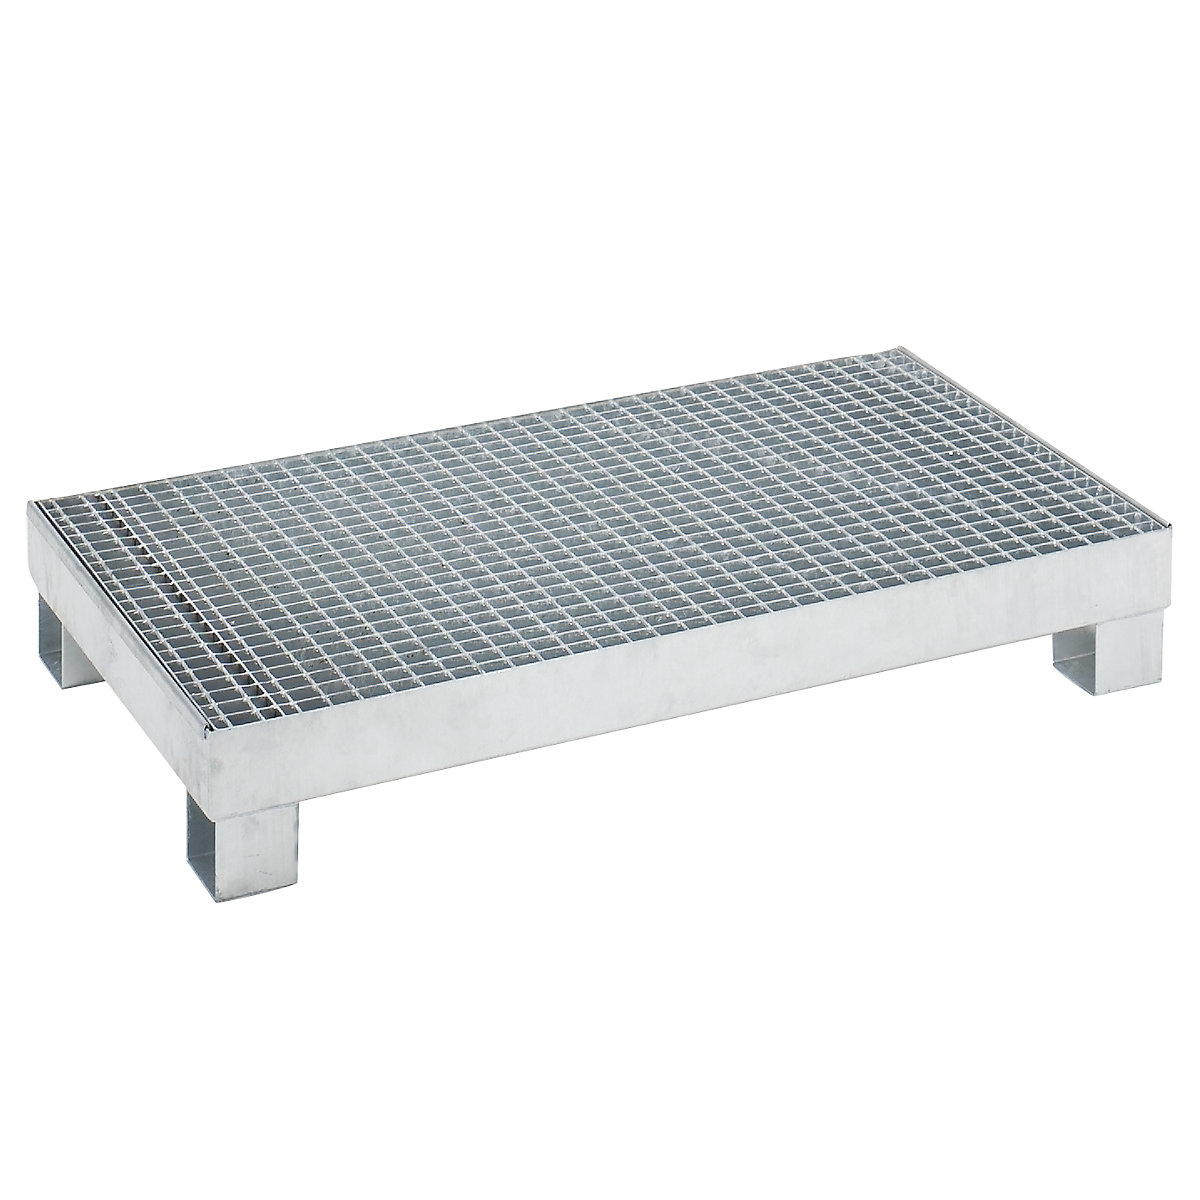 Sump tray for 60 l – eurokraft basic, LxWxH 800 x 1300 x 205 mm, with certification, hot dip galvanised, with grate-3